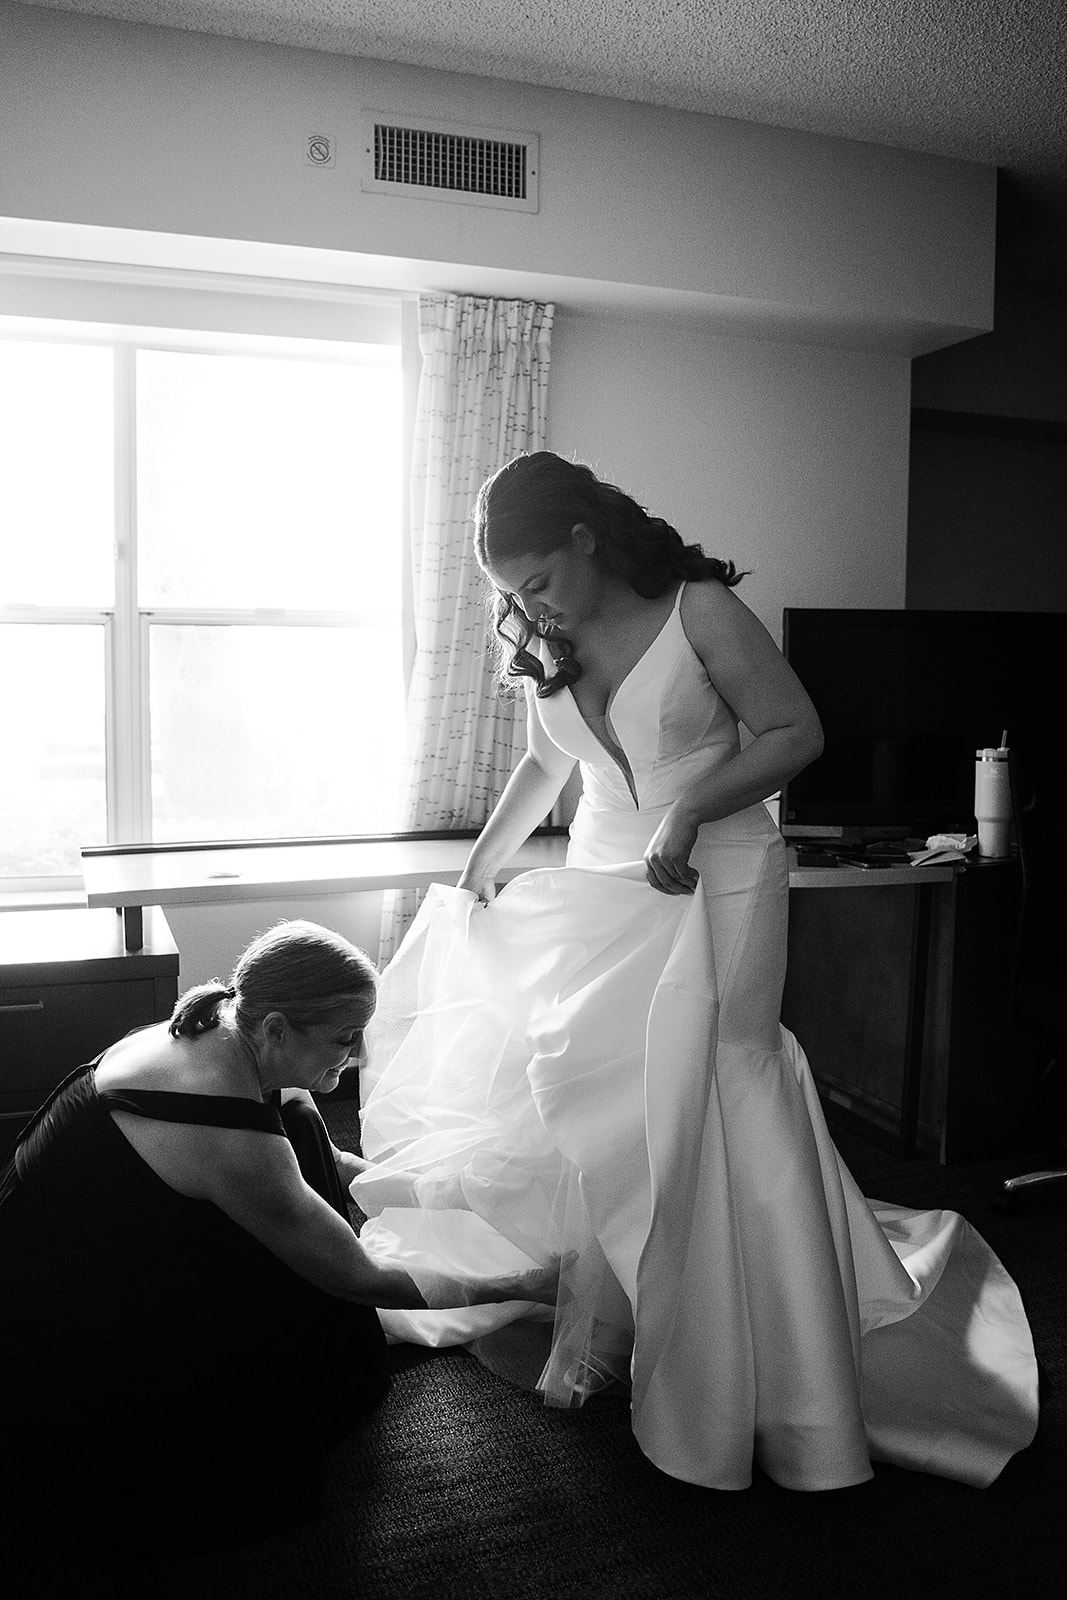 The bride is getting ready putting on her wedding dress with the mother of the bride in Orange County California